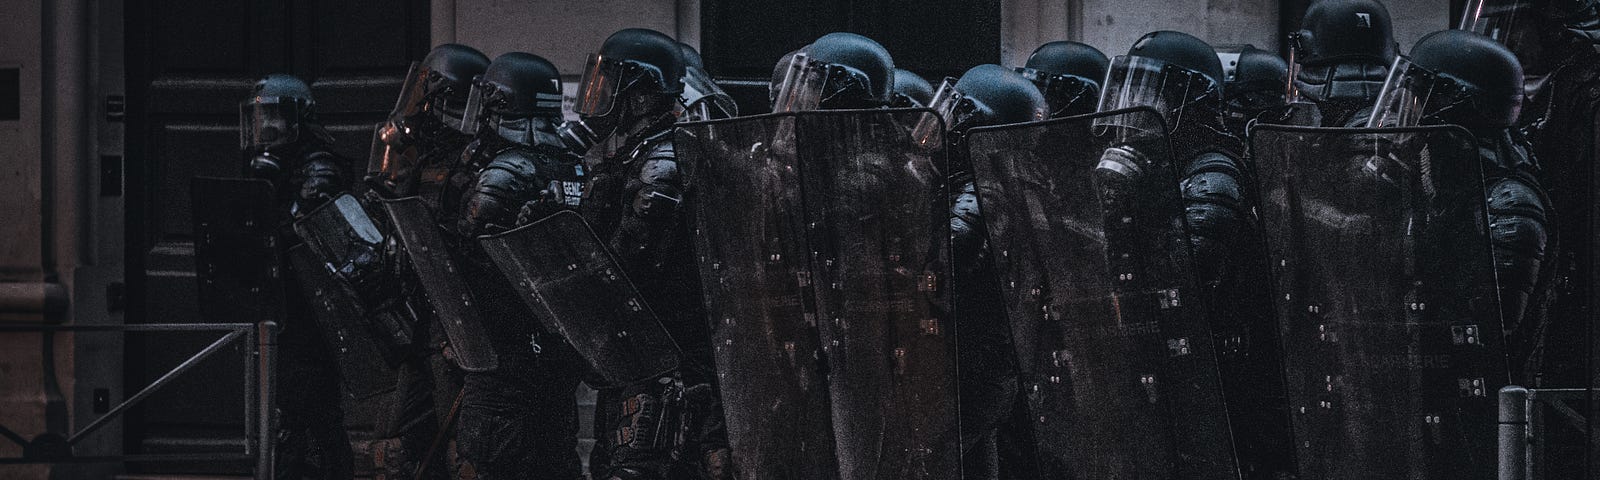 A line of armored police officers hold their ground at a protest. Their gear is spray painted black, obscuring all of their identifying features, and they hold shields and clubs at the ready.